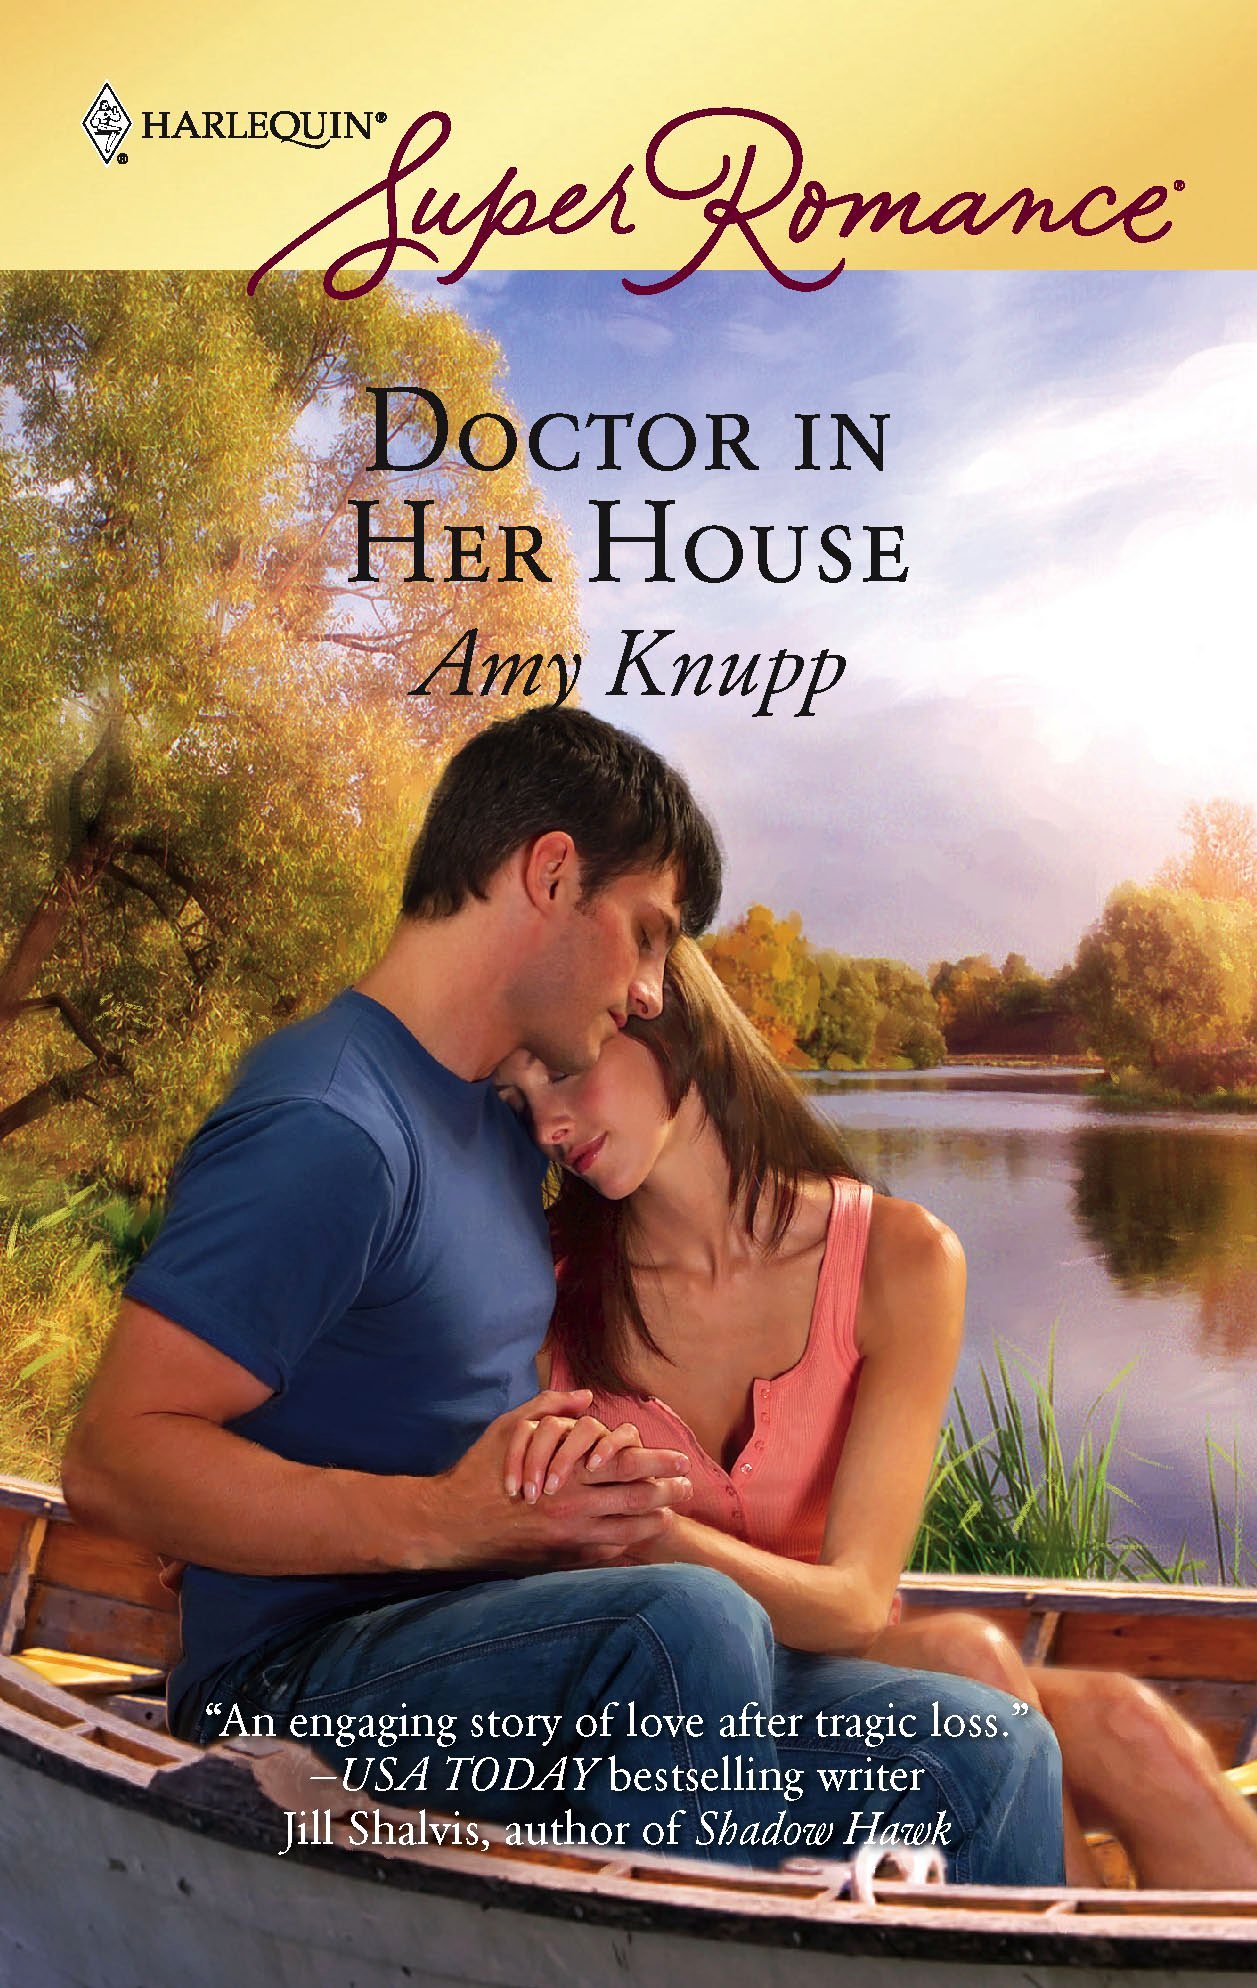 Doctor in Her House (Super Romance)